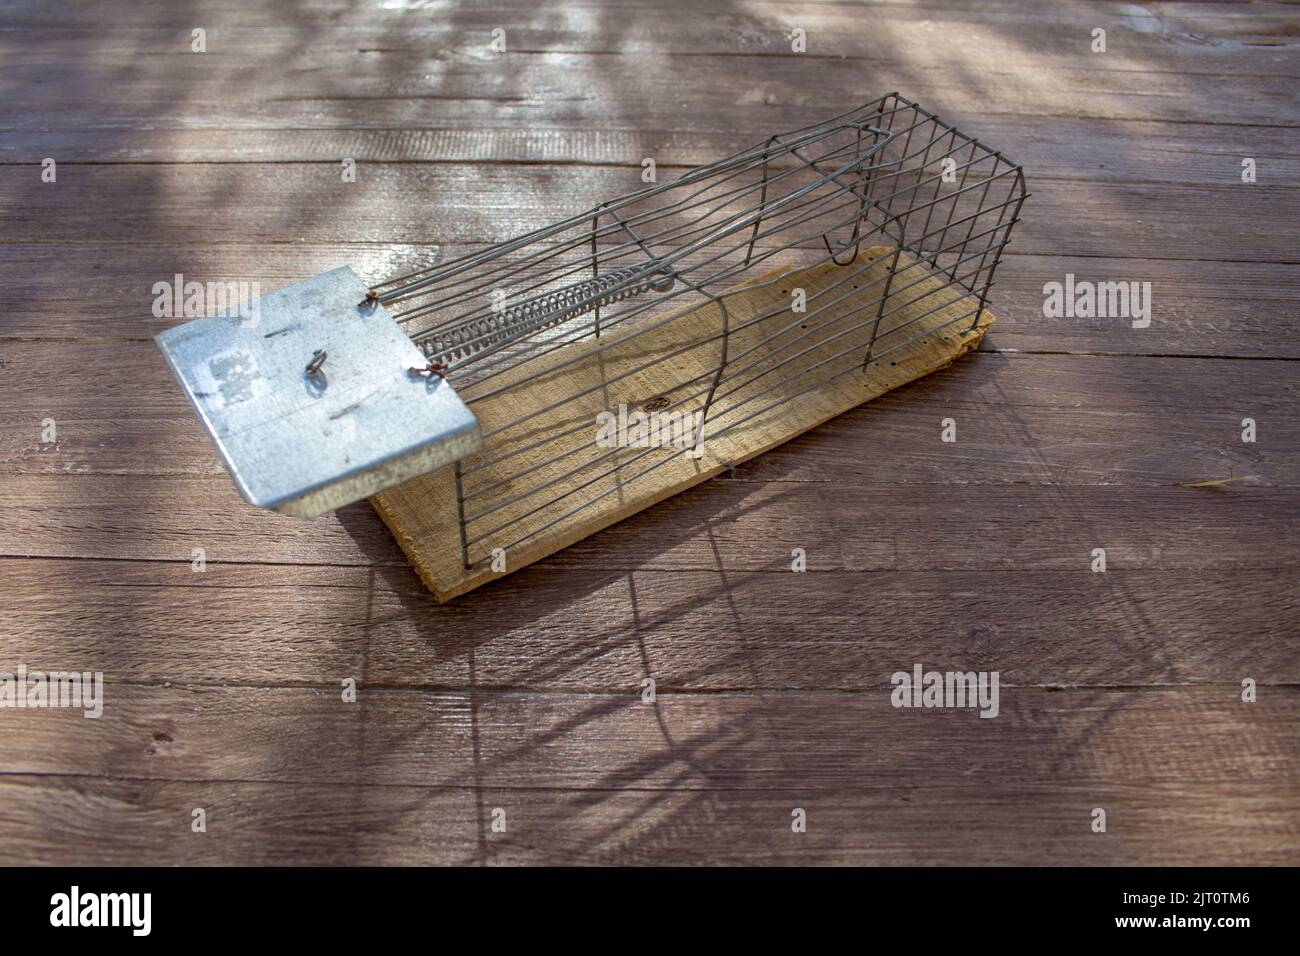 https://c8.alamy.com/comp/2JT0TM6/image-of-an-open-mousetrap-reference-to-the-traps-that-run-in-life-2JT0TM6.jpg